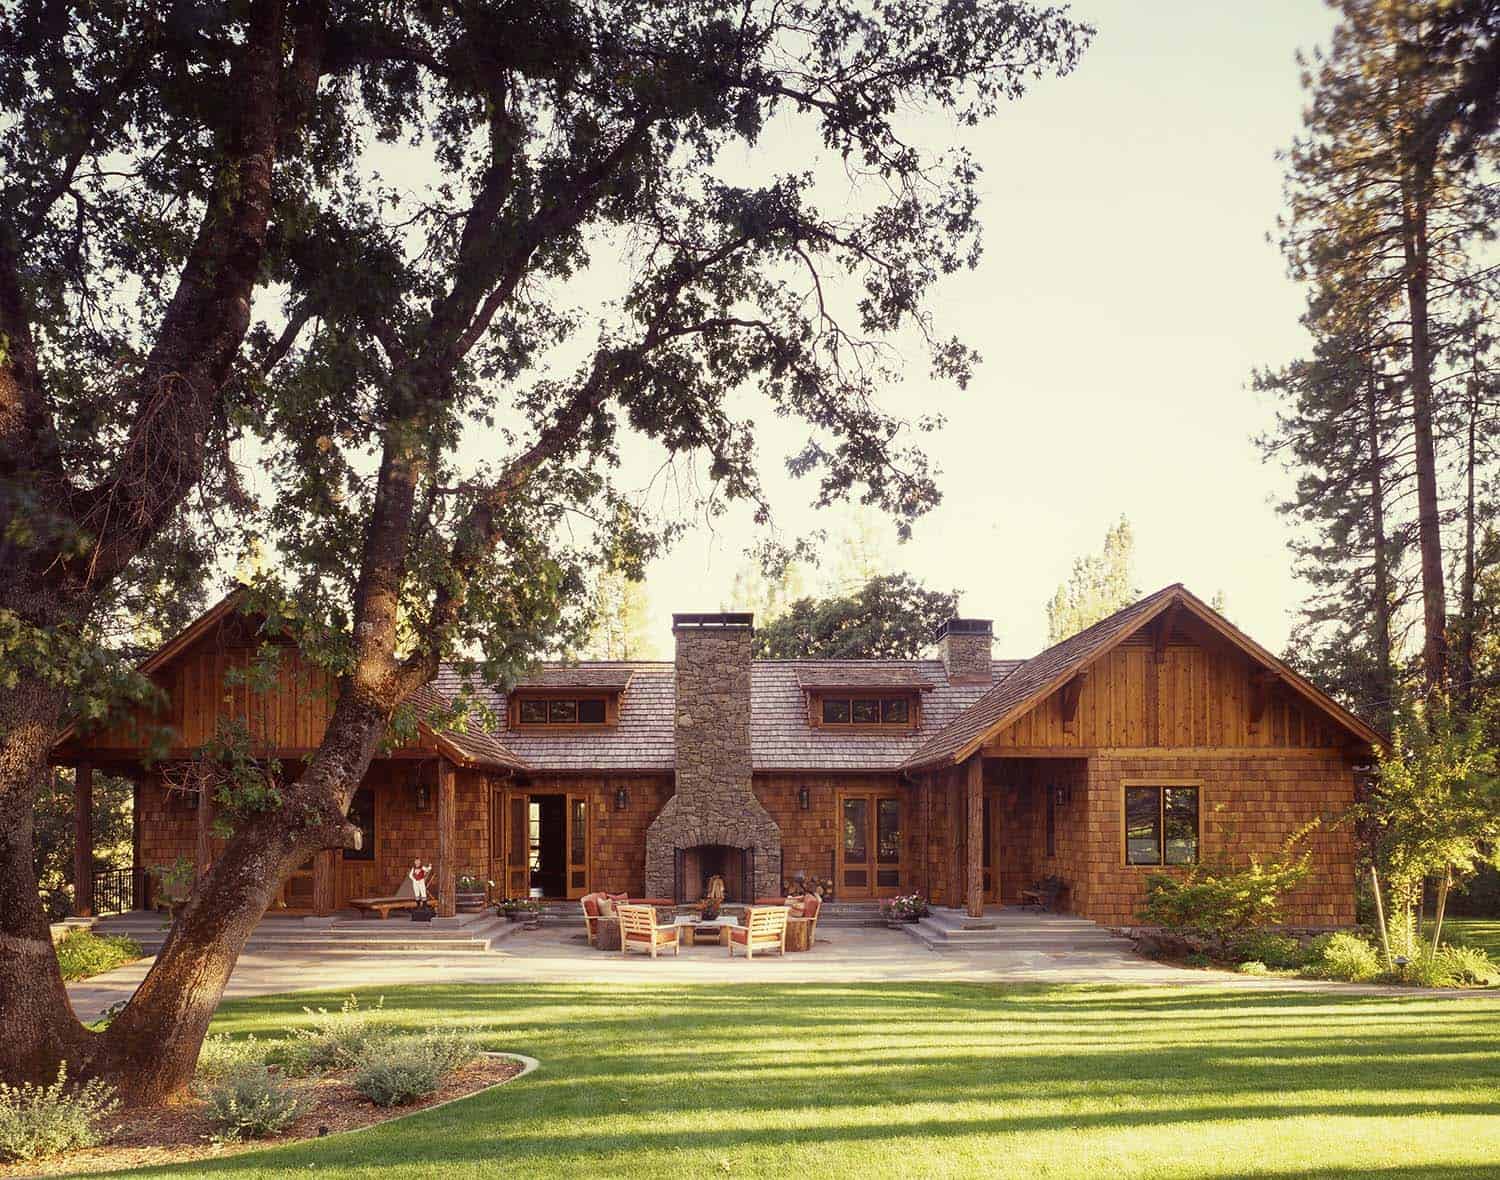 family-ranch-rustic-exterior